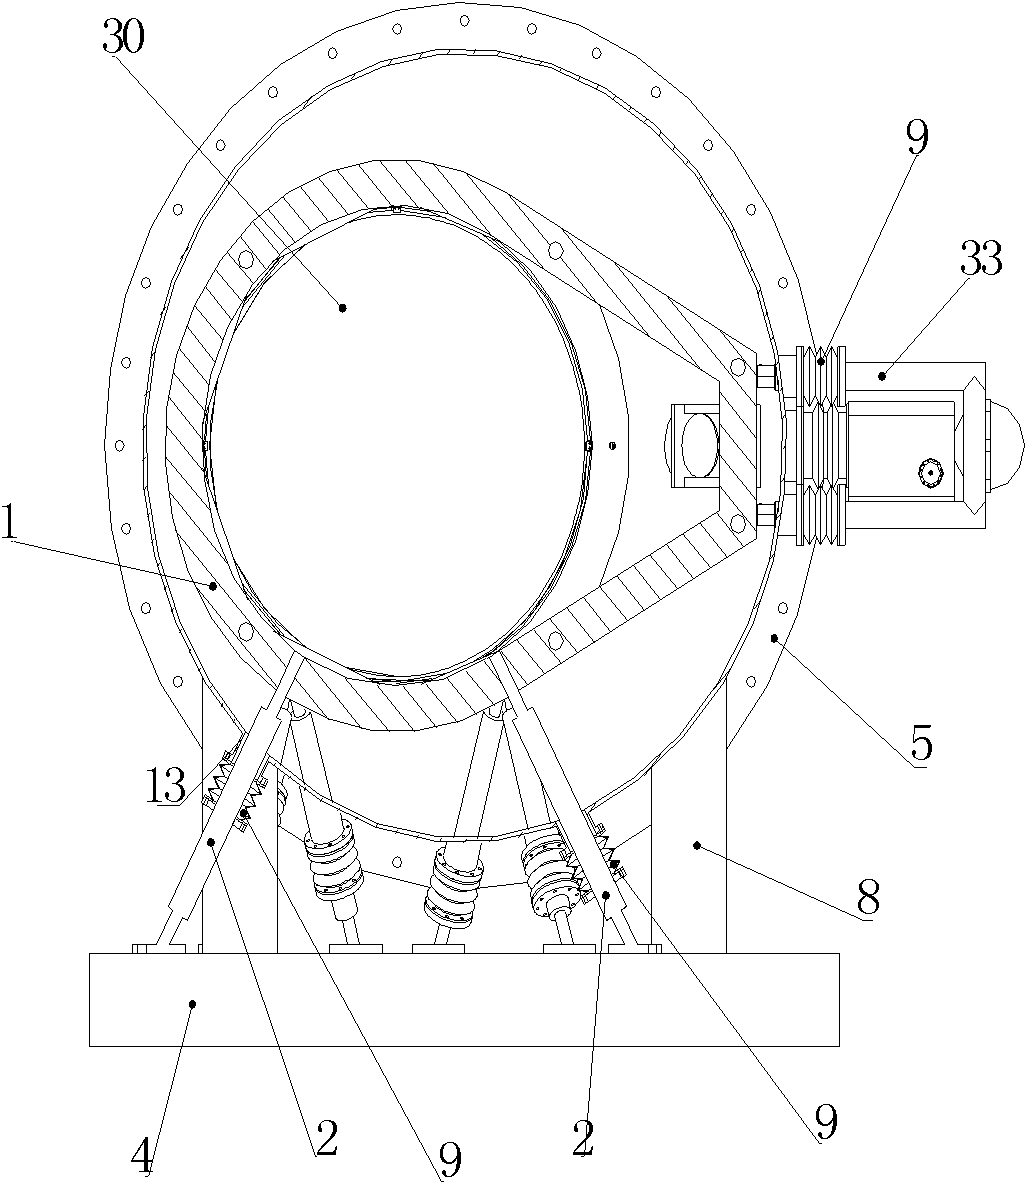 Primary structure of large-aperture long-focus collimator